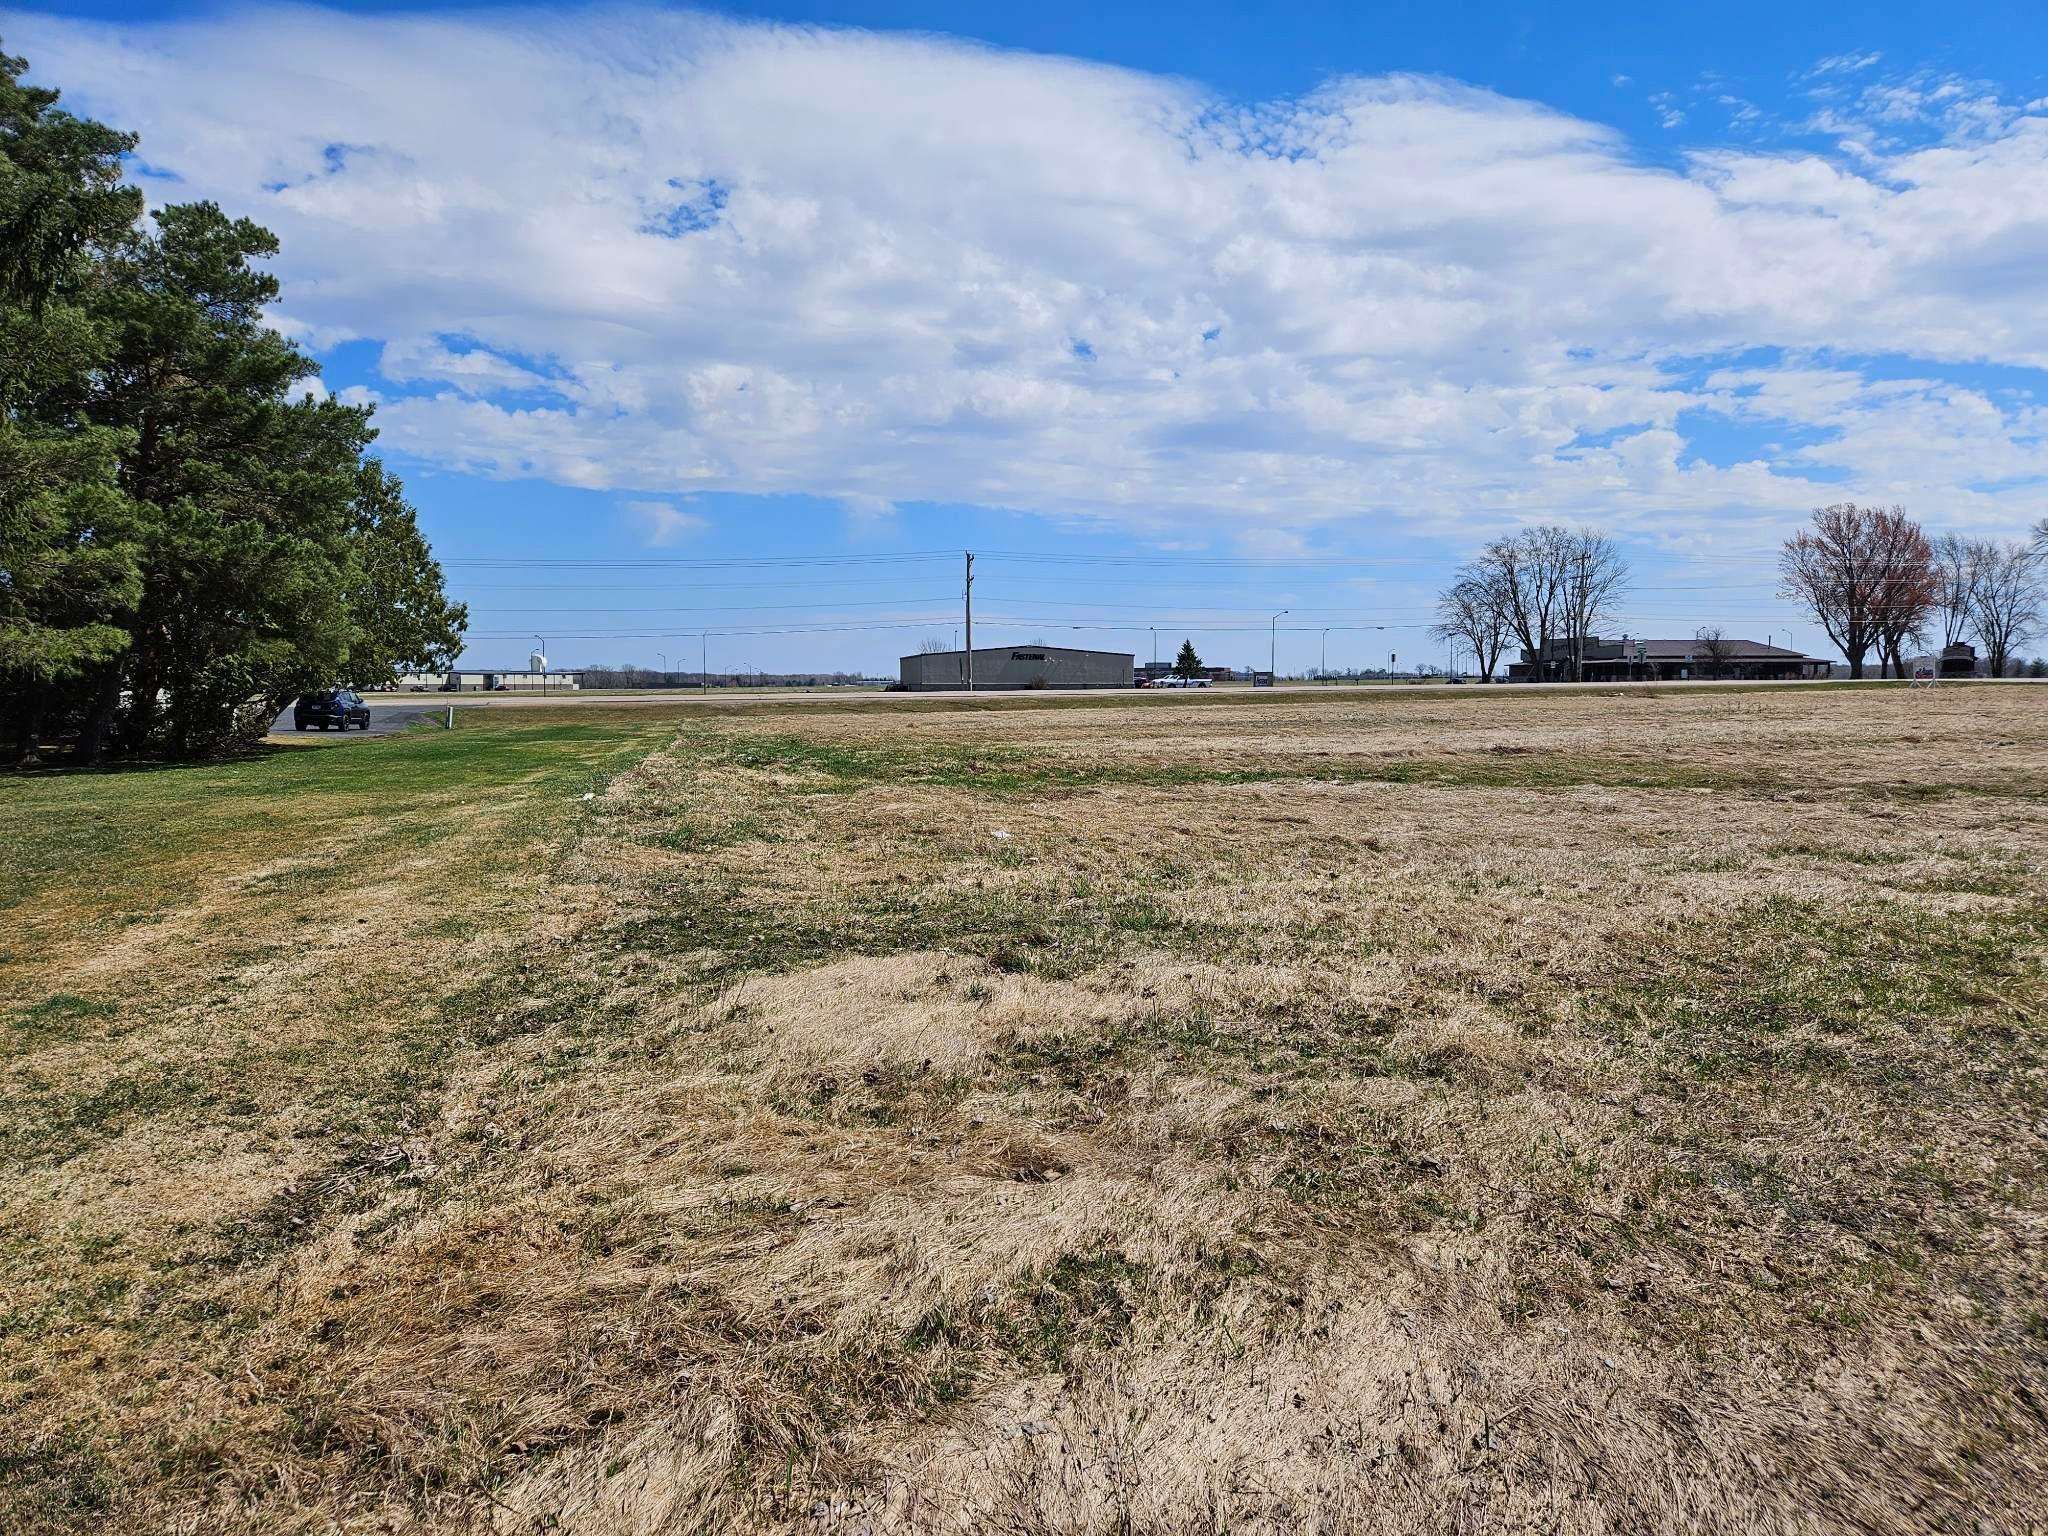 3616 S CENTRAL AVENUE, Marshfield, Wisconsin 54449, ,Land,For Sale,3616 S CENTRAL AVENUE,22201342